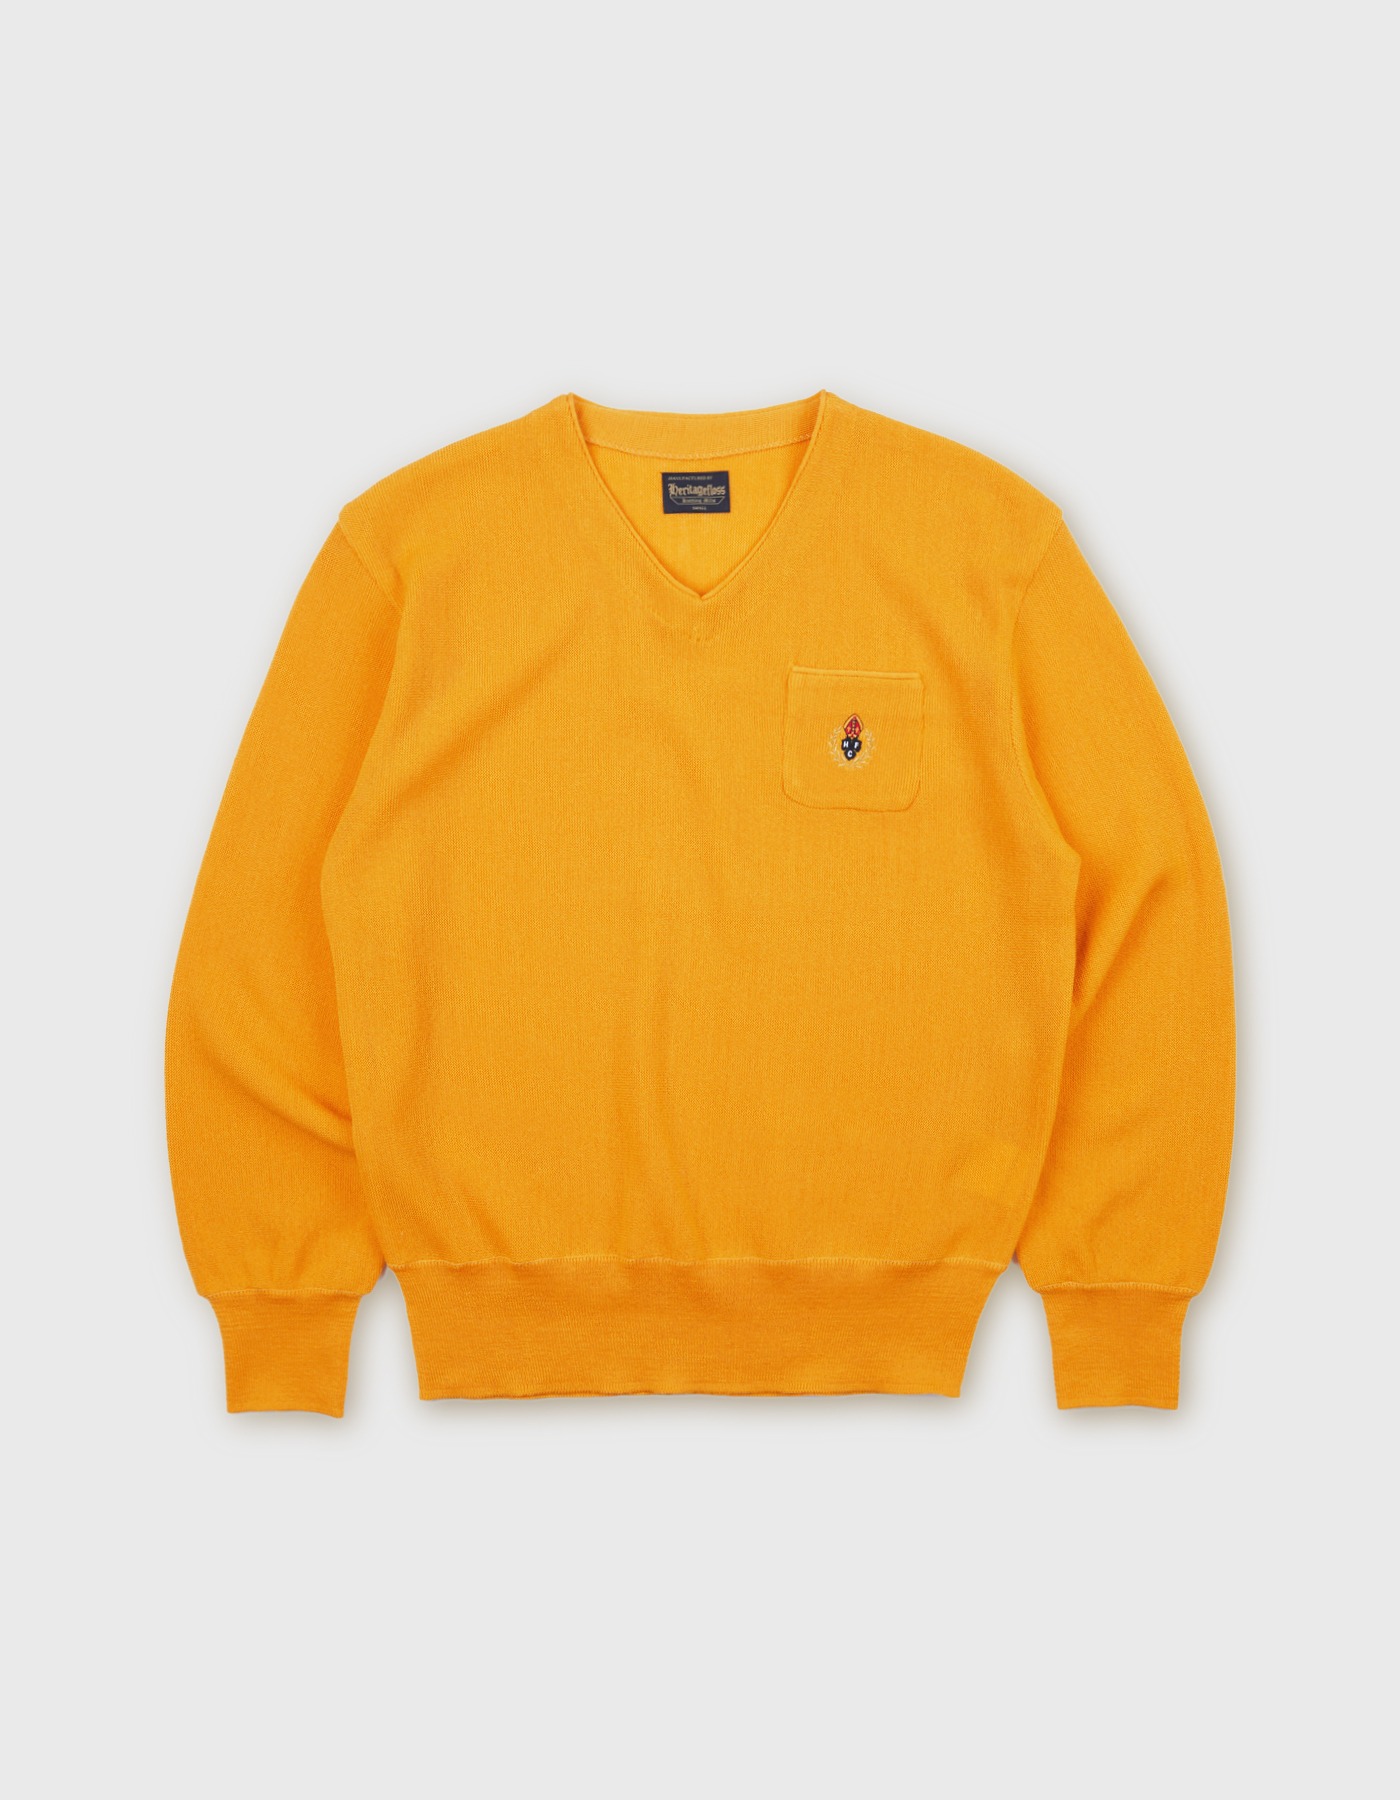 HFC CREST WOOL V-NECK SWEATER / Yellow